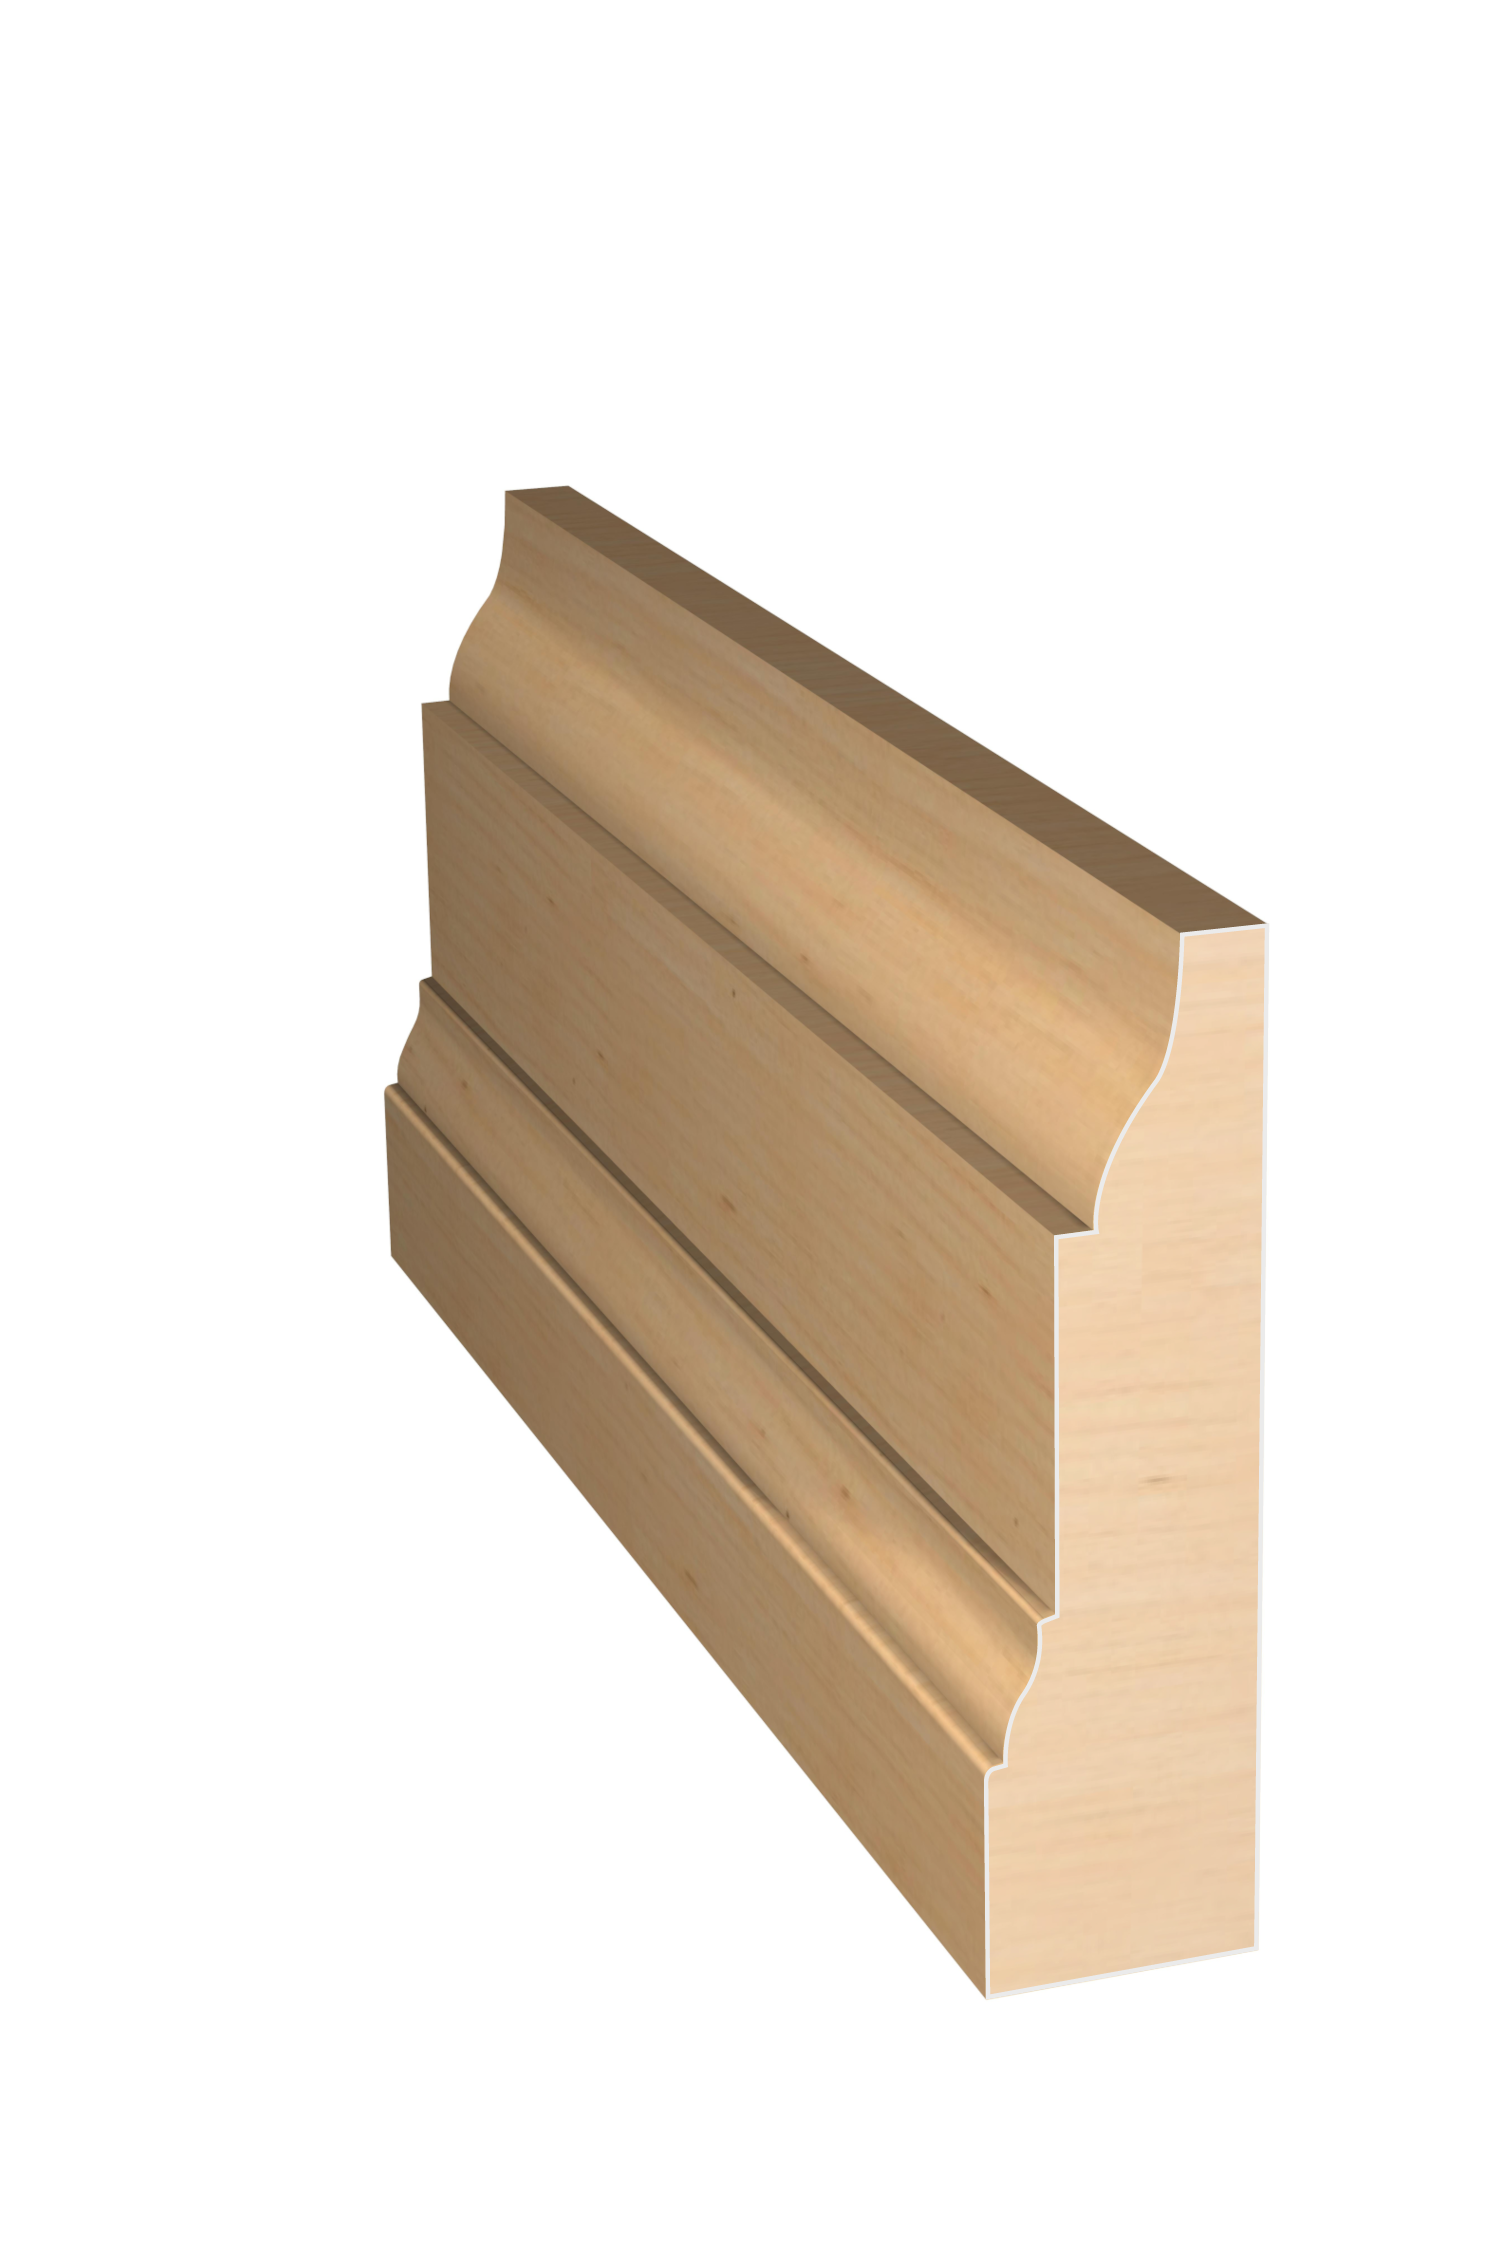 Three dimensional rendering of custom casing wood molding CAPL2343 made by Public Lumber Company in Detroit.